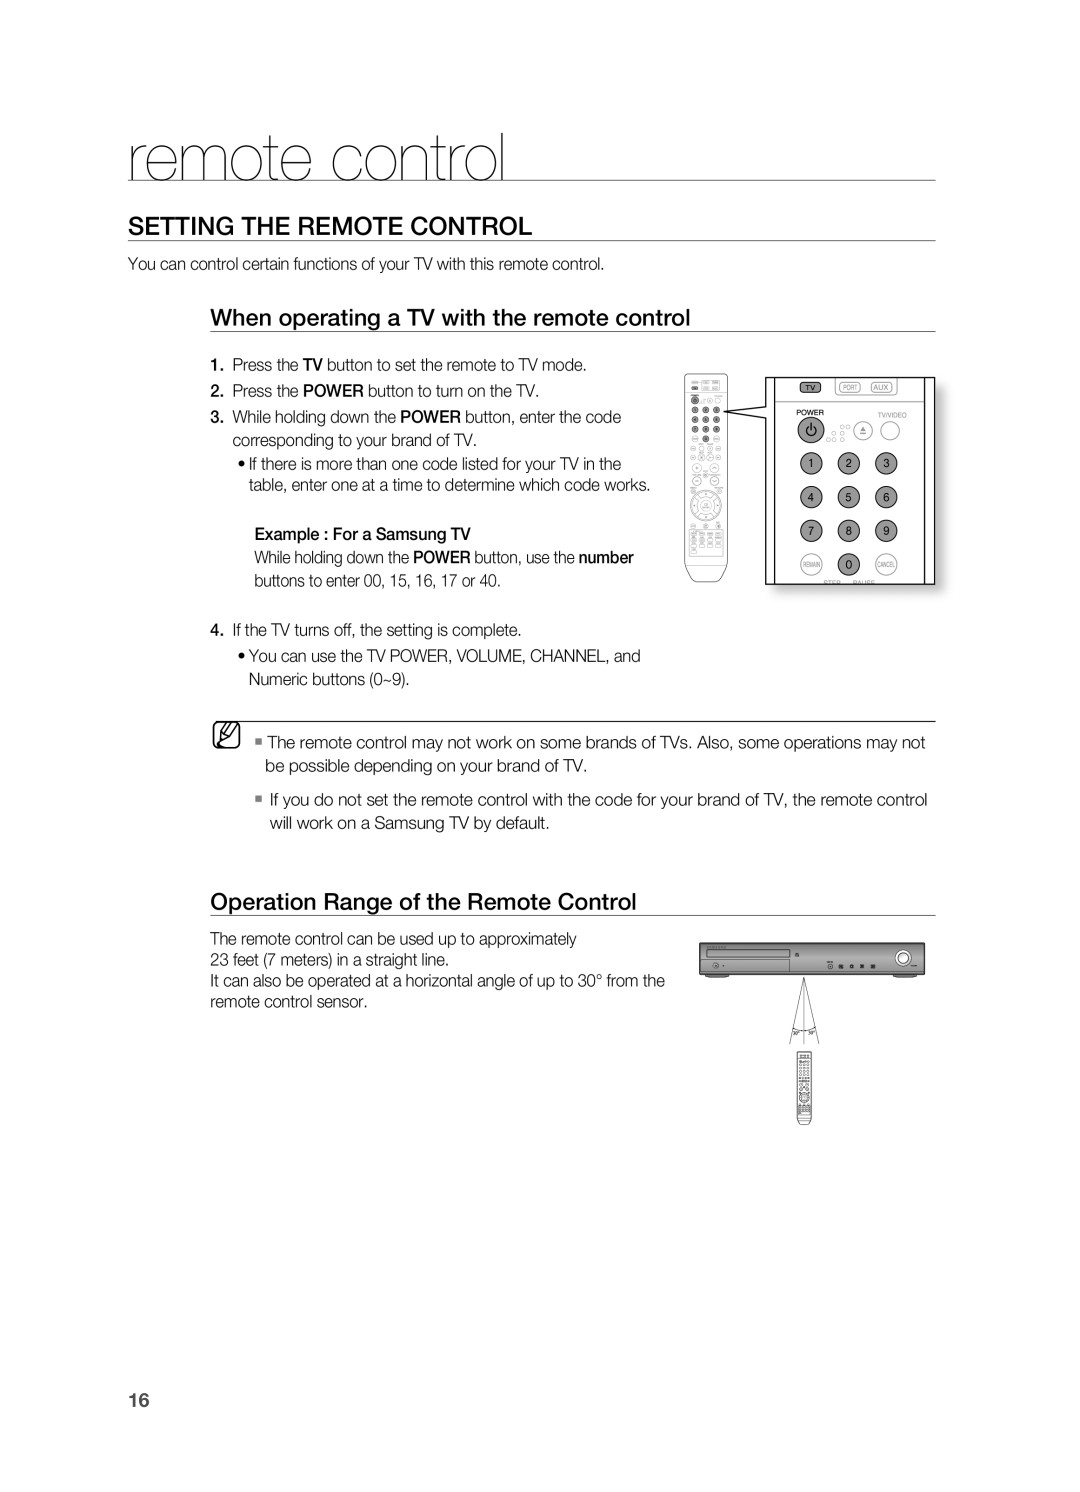 Samsung HT-TWZ315 manual SEttinG tHE rEmOtE COntrOL, When operating a tV with the remote control 